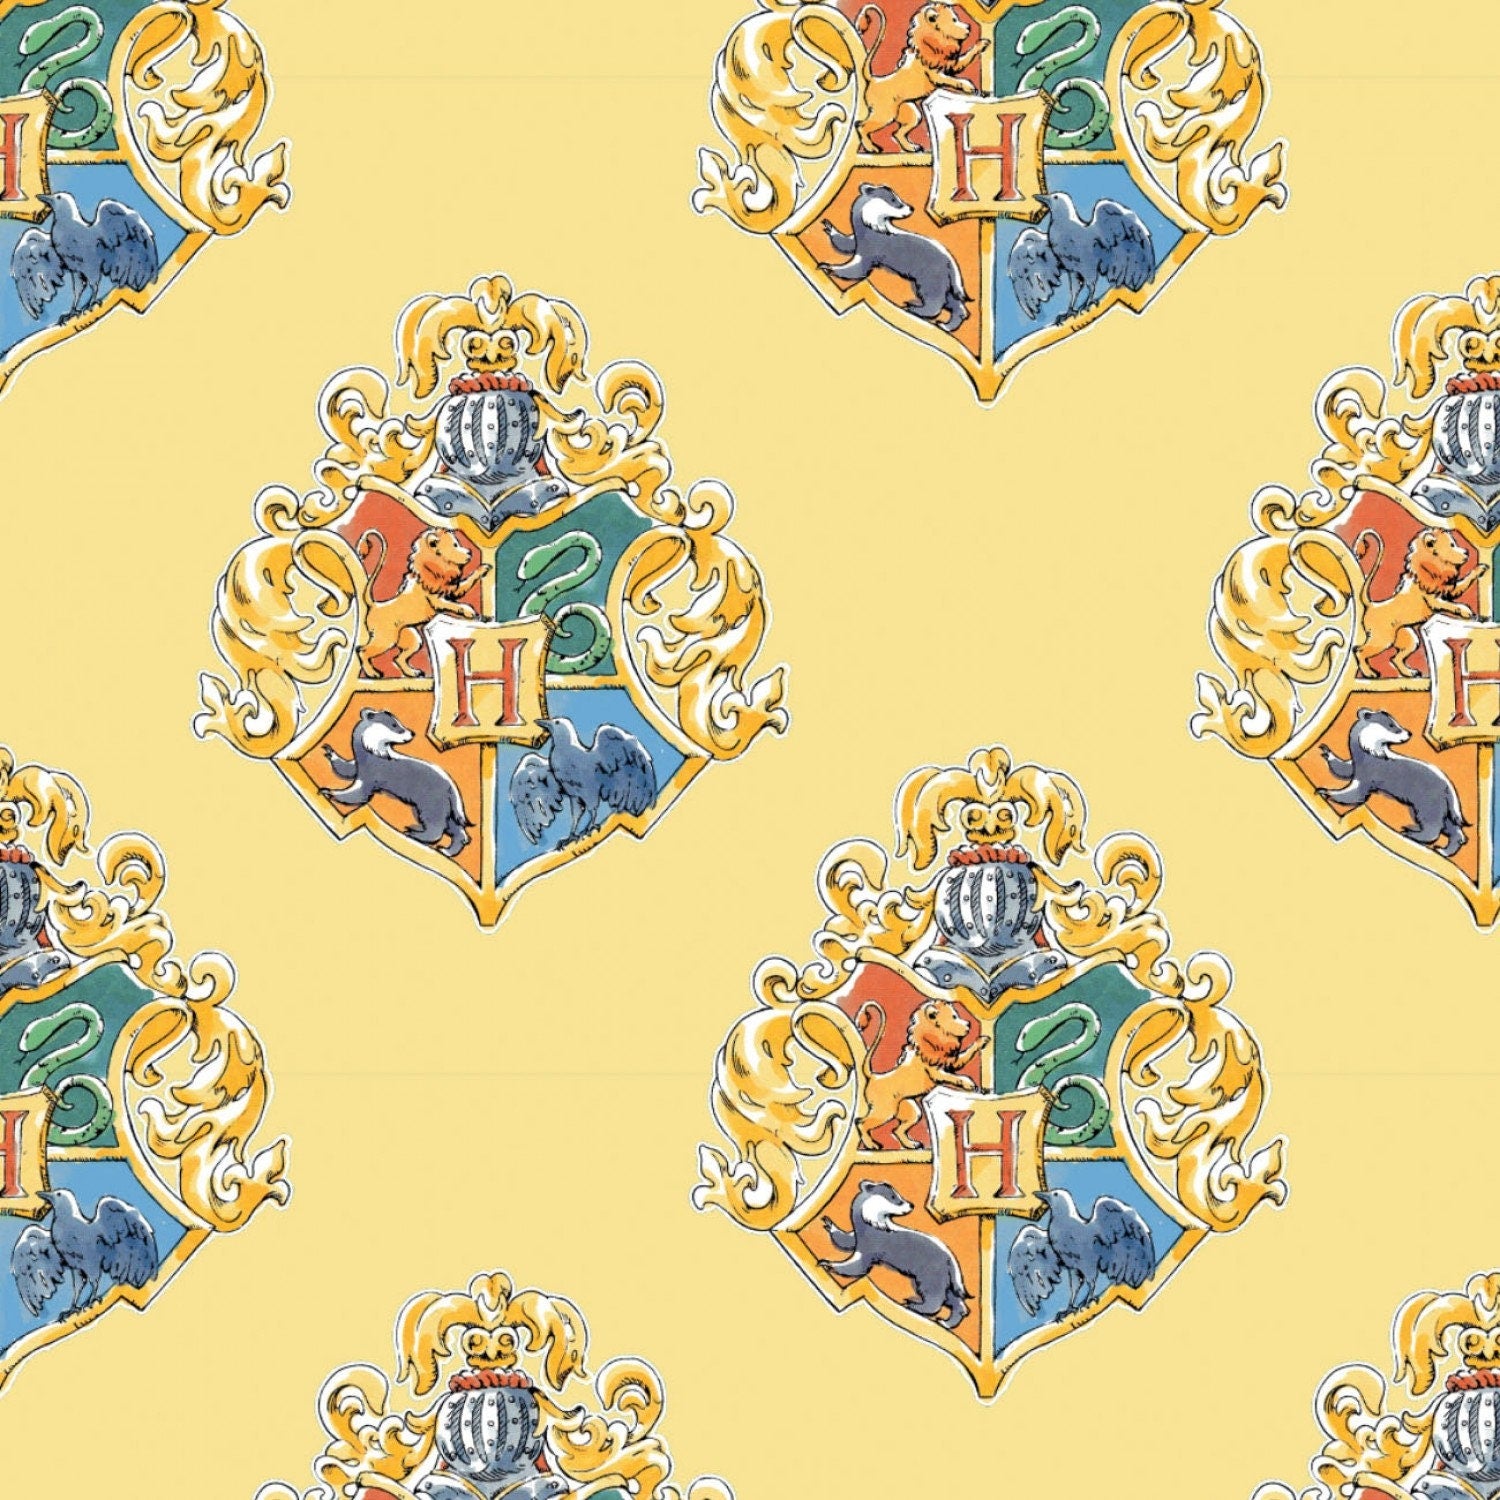 Harry Potter Fabric - Crest in Yellow - 100% cotton fabric by Camelot Fabrics - Logos Wizards Sewing Quilting - SHIPS NEXT DAY